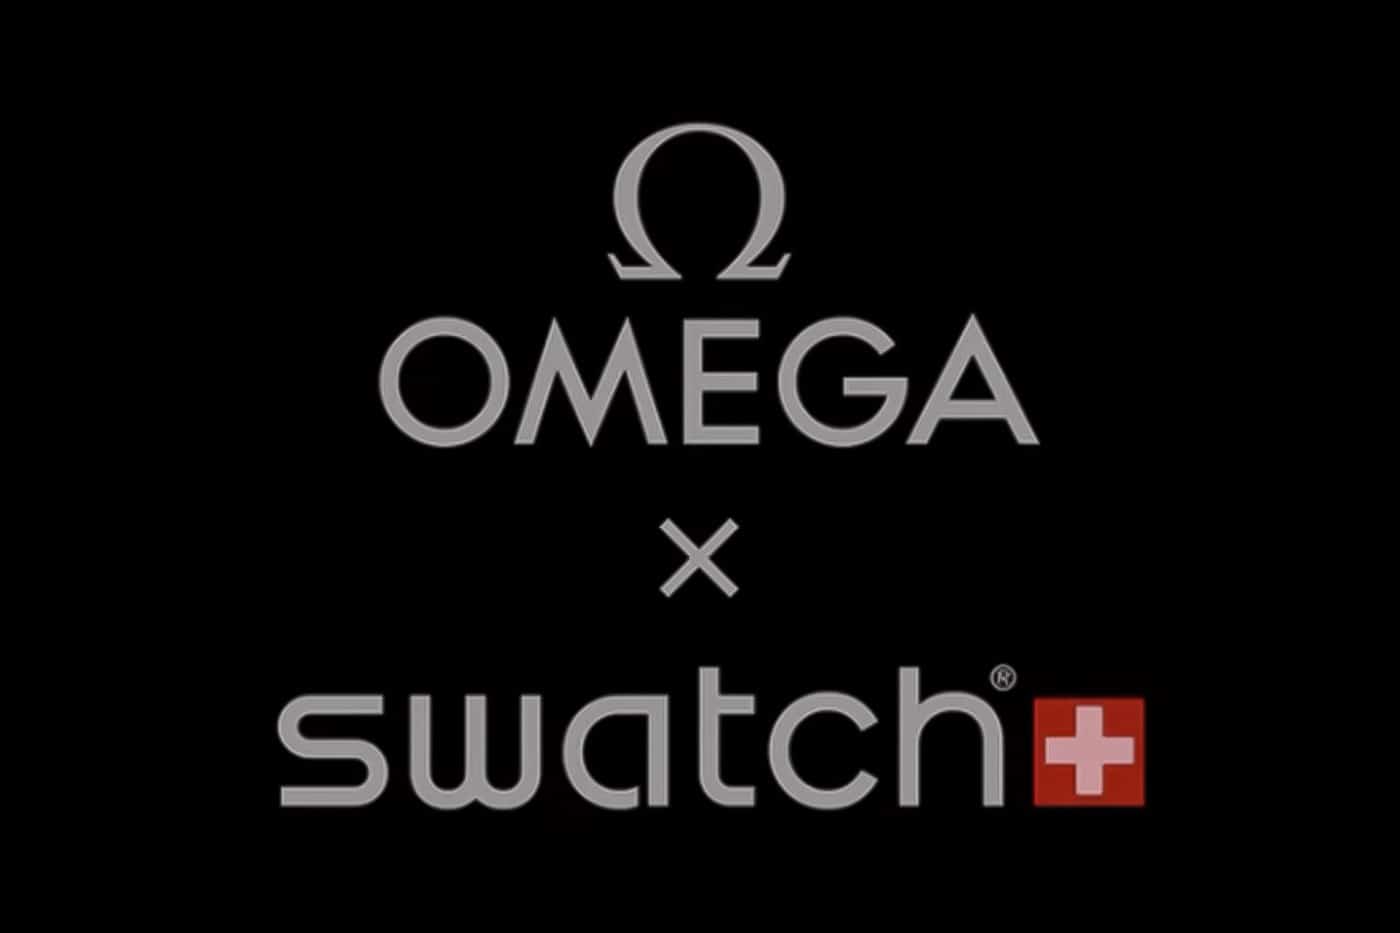 OMEGA x Swatch MoonSwatch Mission to Moonshine Gold